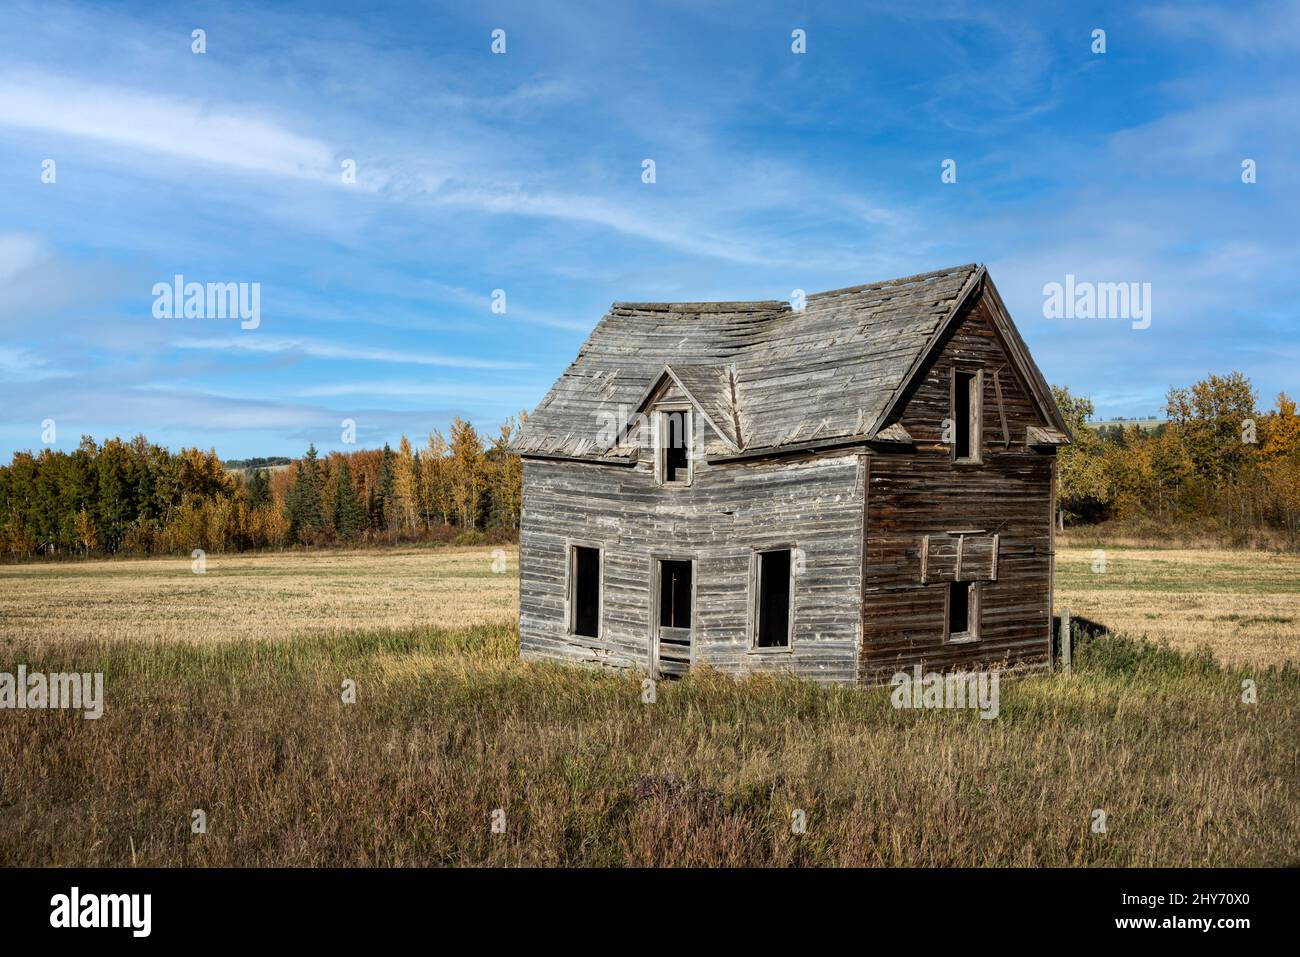 Old, abandoned wooden homestead/farmhouse in Alberta, Canada. Stock Photo